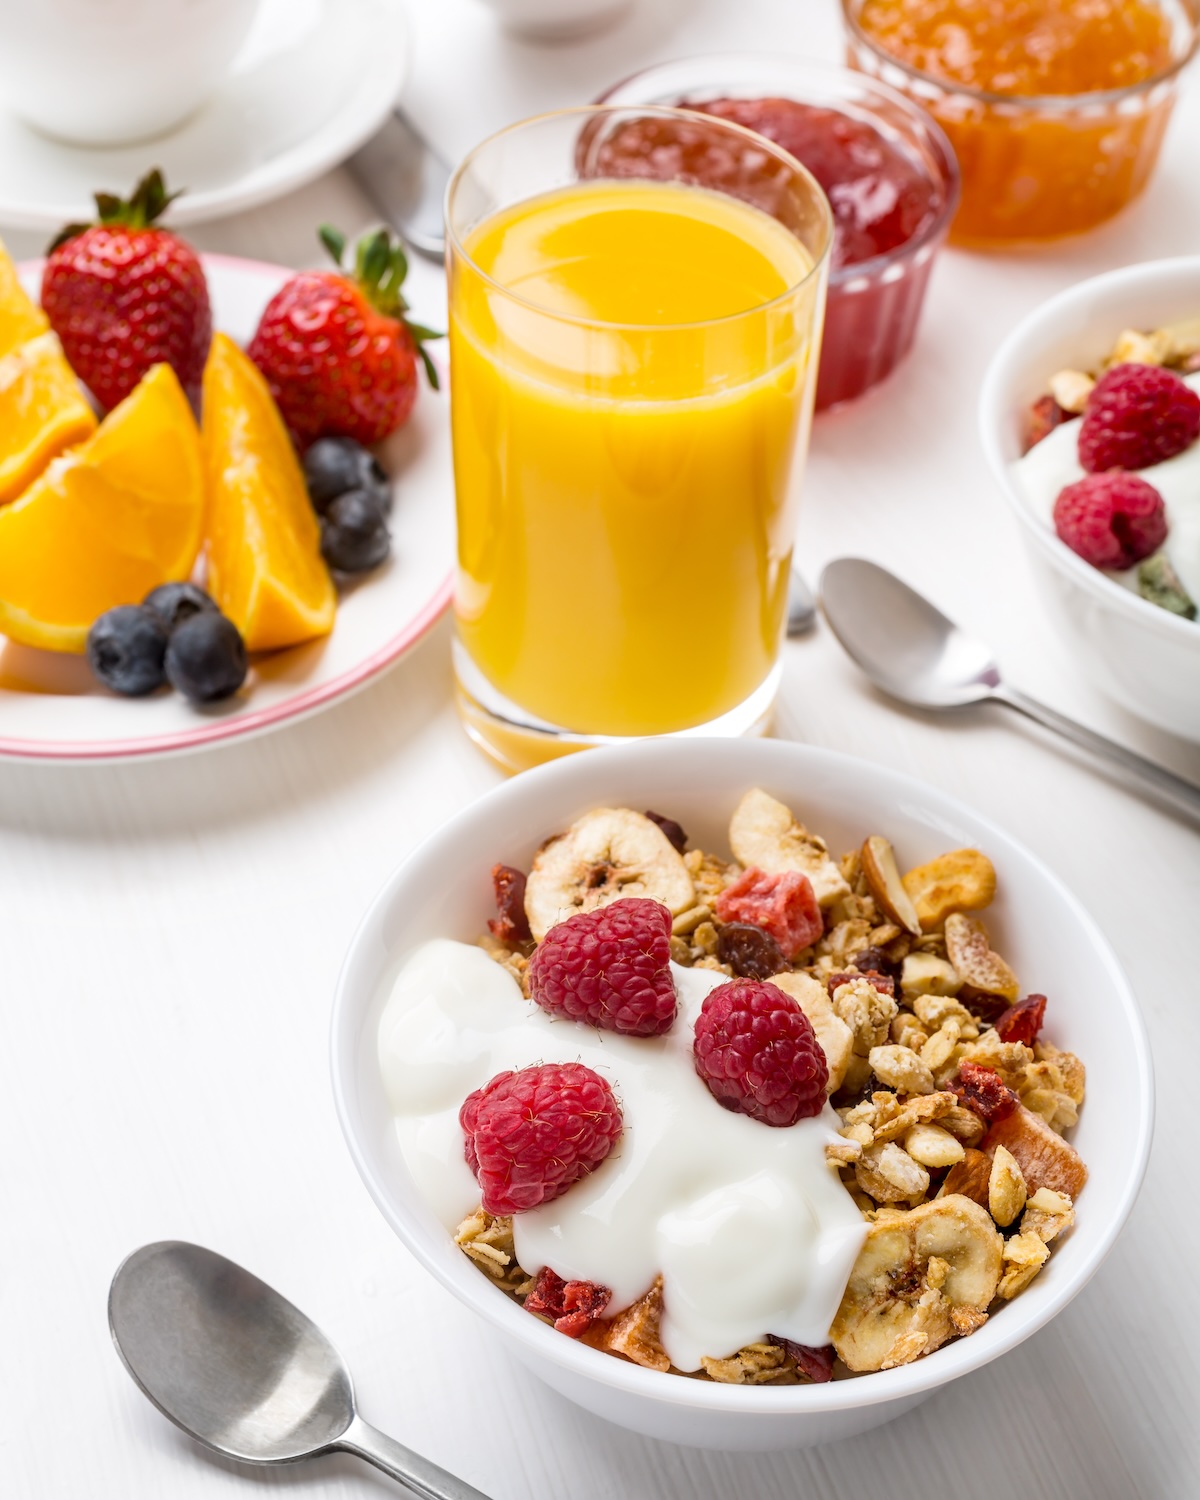 Healthy Breakfast Meal - Bowl of Fruit, Oat and Nut Granola with Yogurt and Raspberries